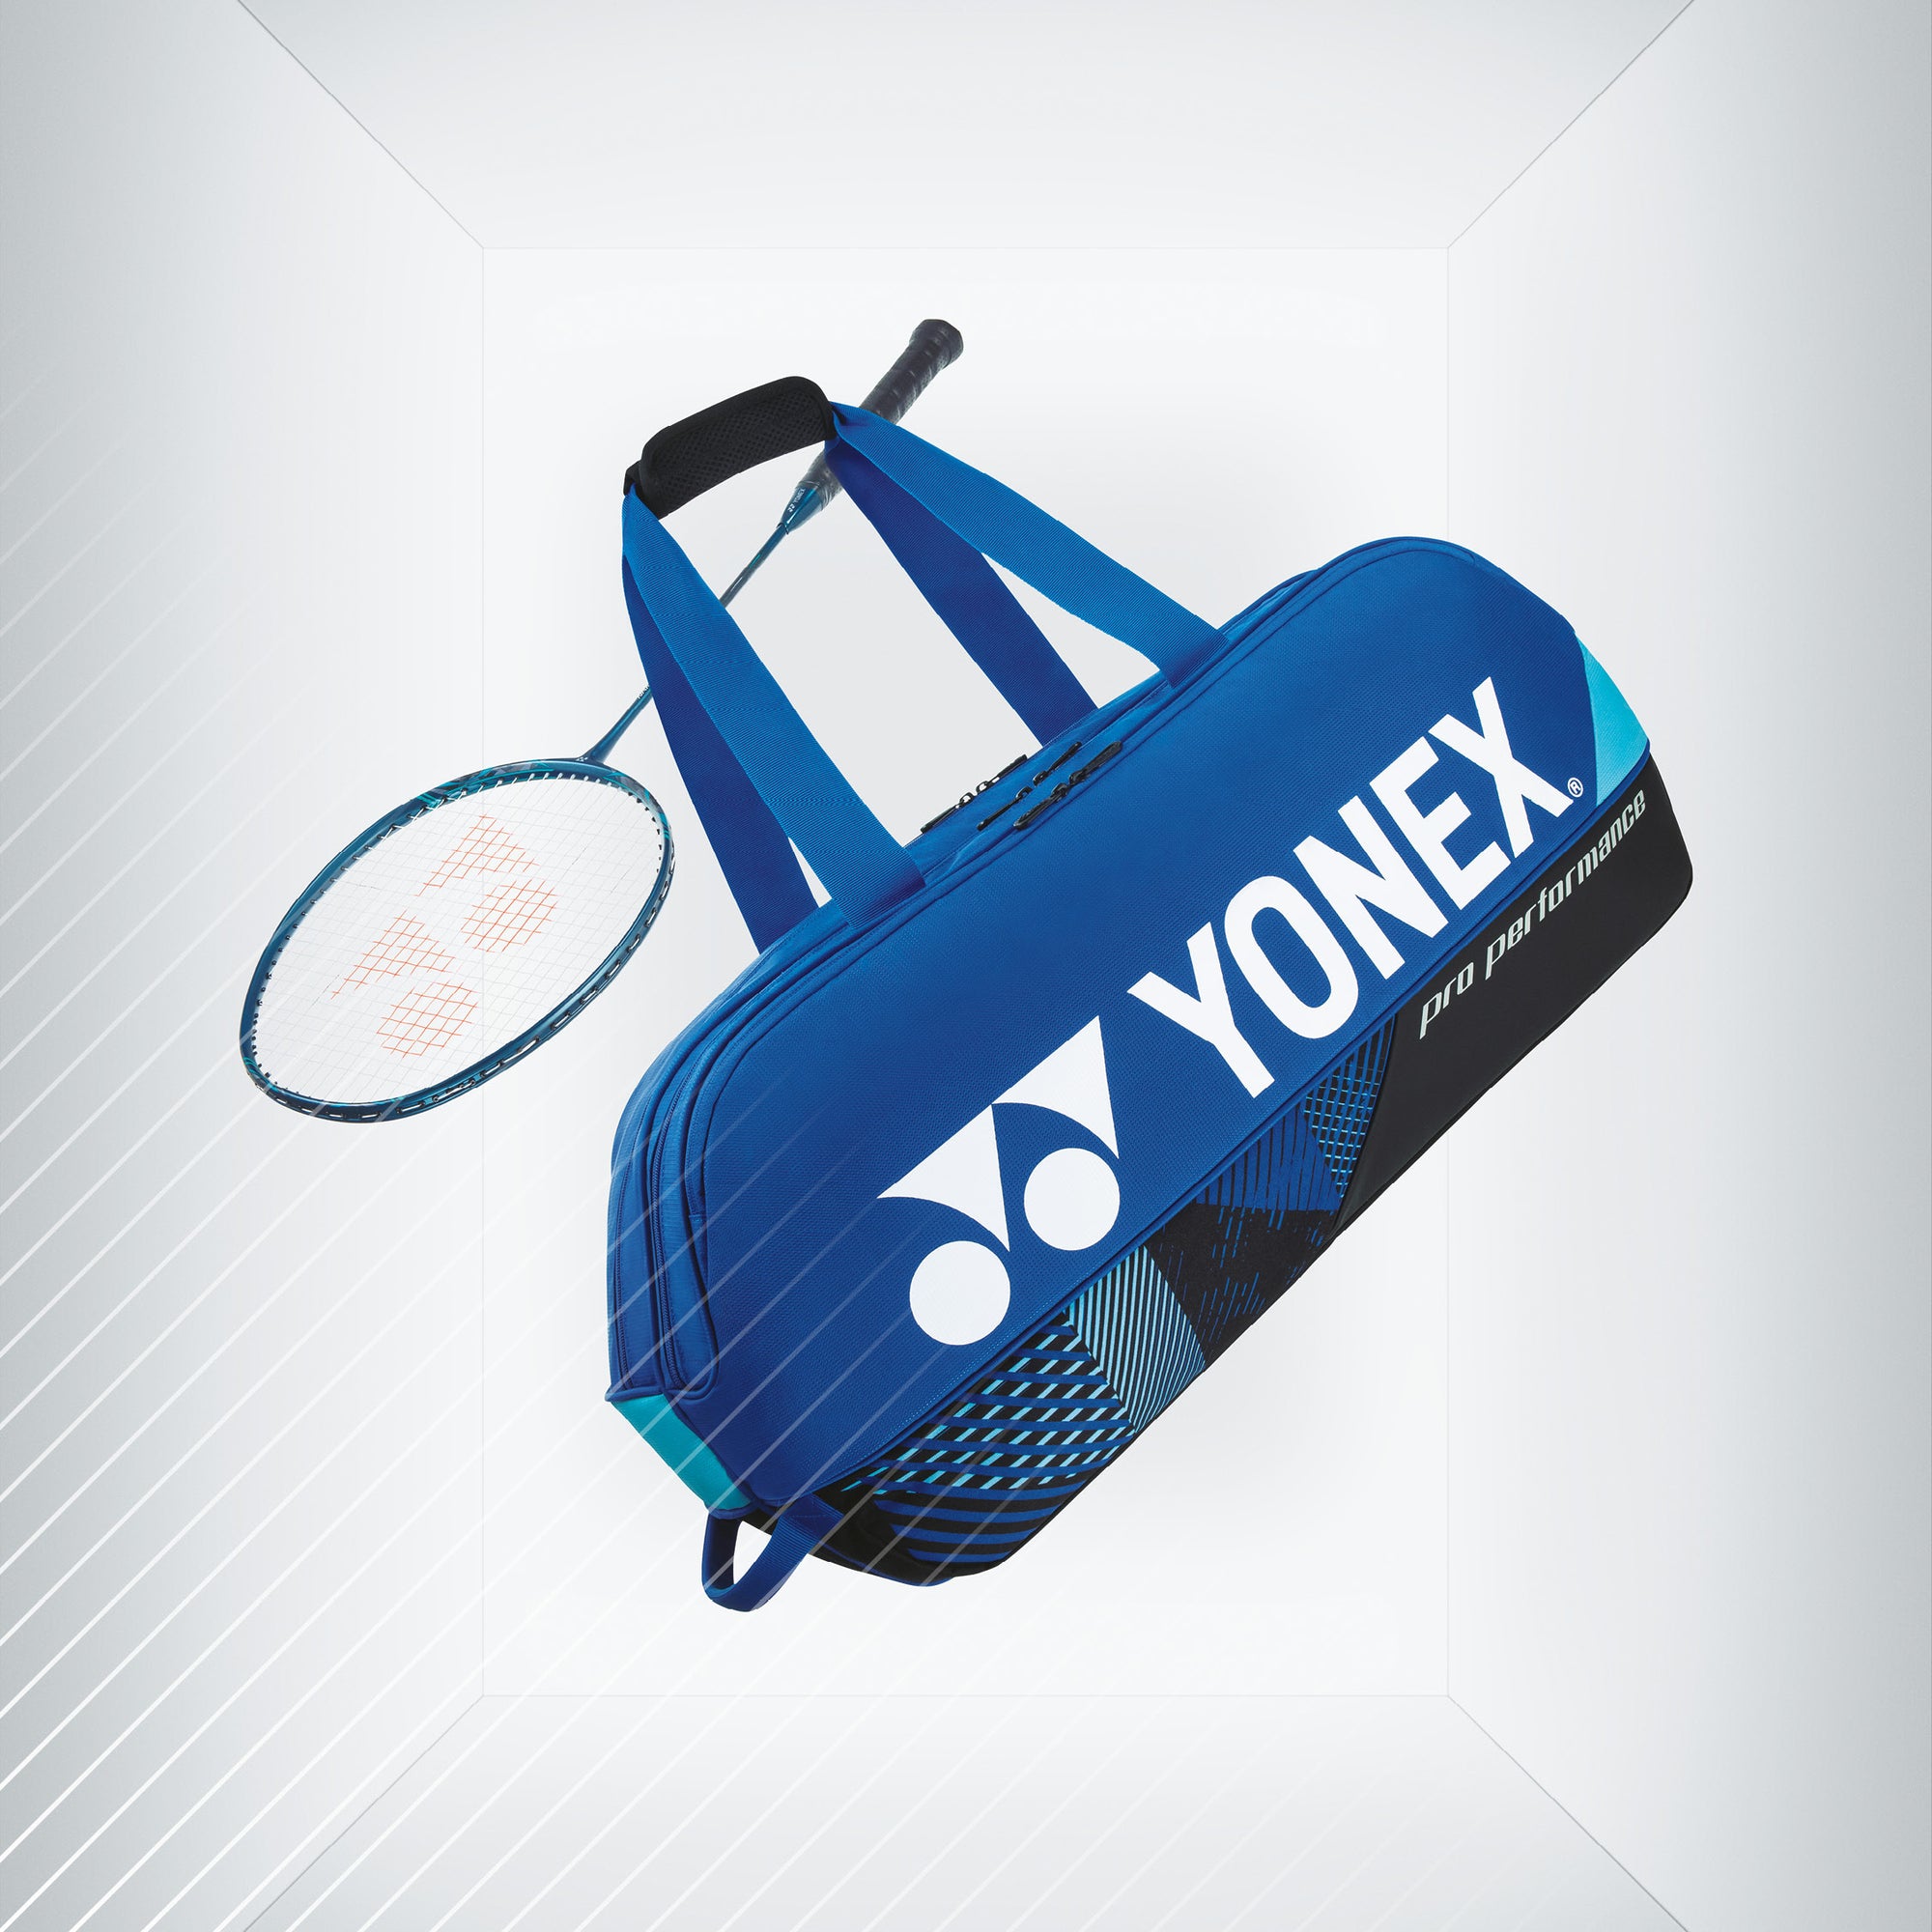 Choosing your Yonex Tournament bag: a guide to Expert, Pro, Active, and Team series